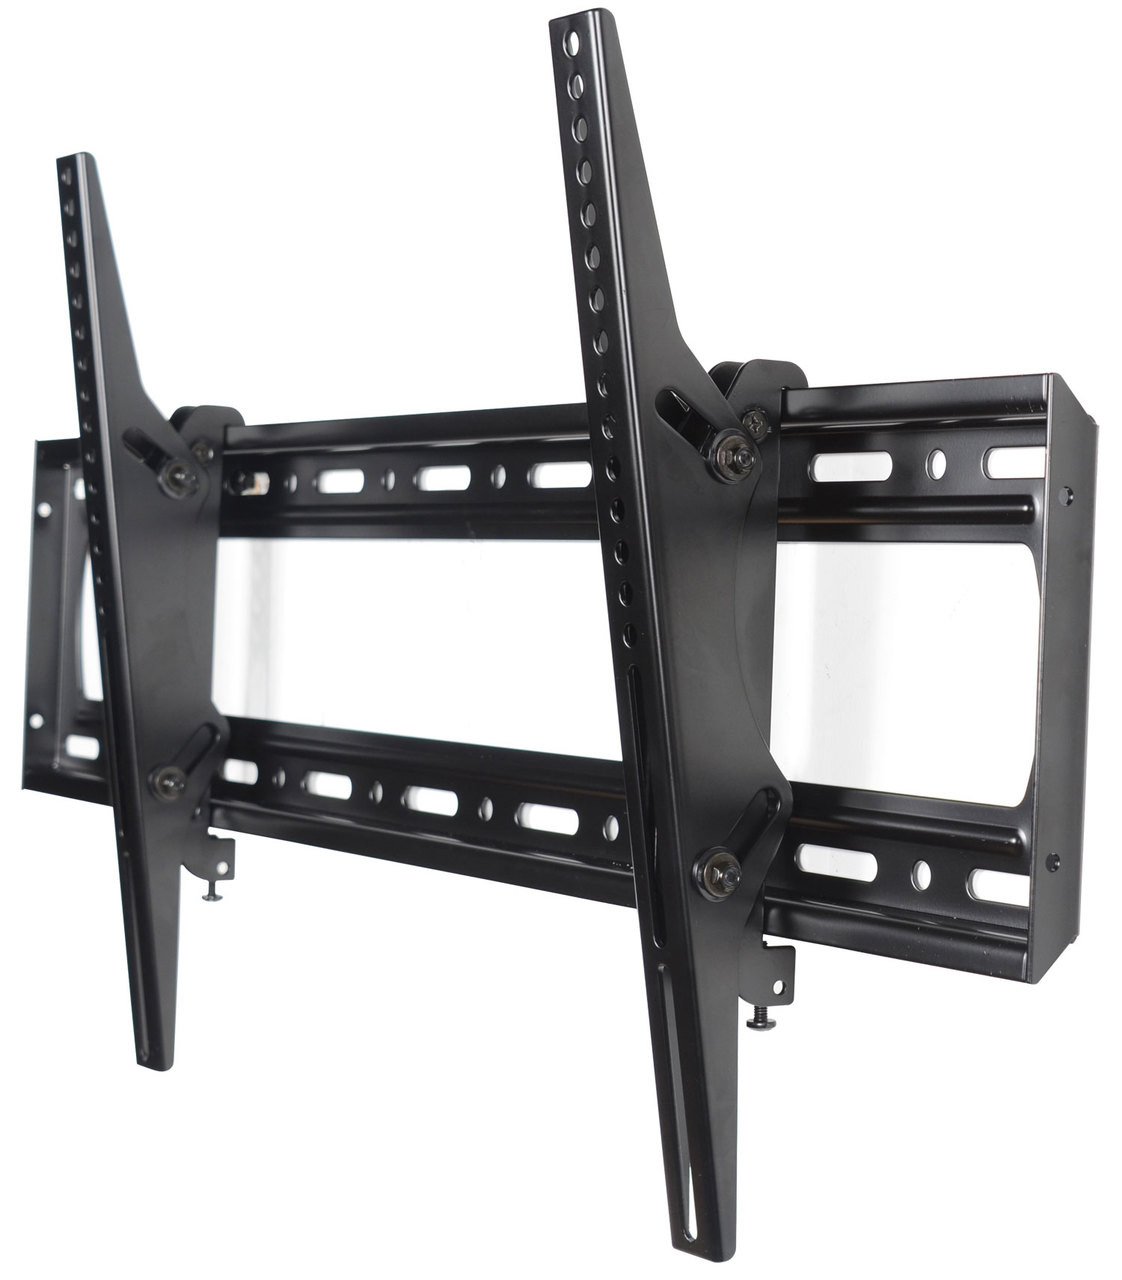 VideoSecu TV Wall Mount Bracket for most LG 50 52 55 58 60 62 63 65  68 70 75 80 85 LED LCD TV Flat Panel Display with VESA up to 800x400mm  MP804B MZ8 